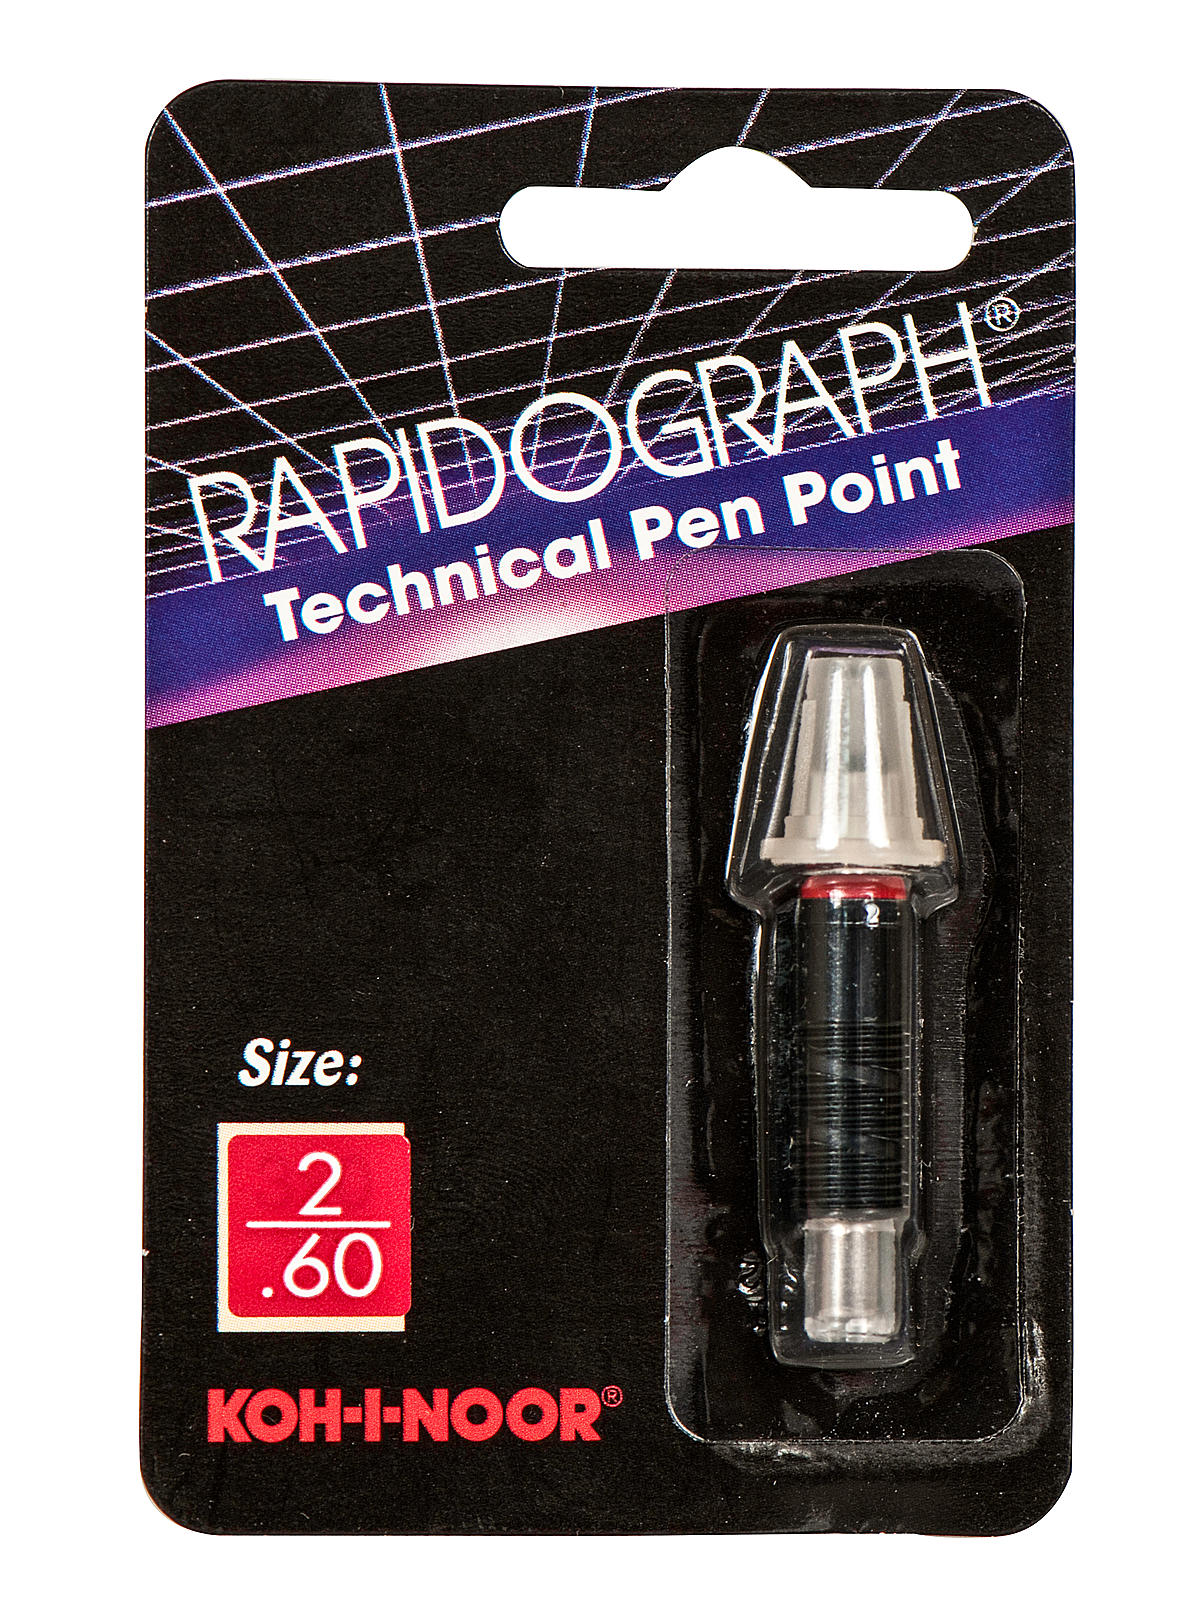 Rapidograph No. 72D Replacement Points 2 0.60 Mm